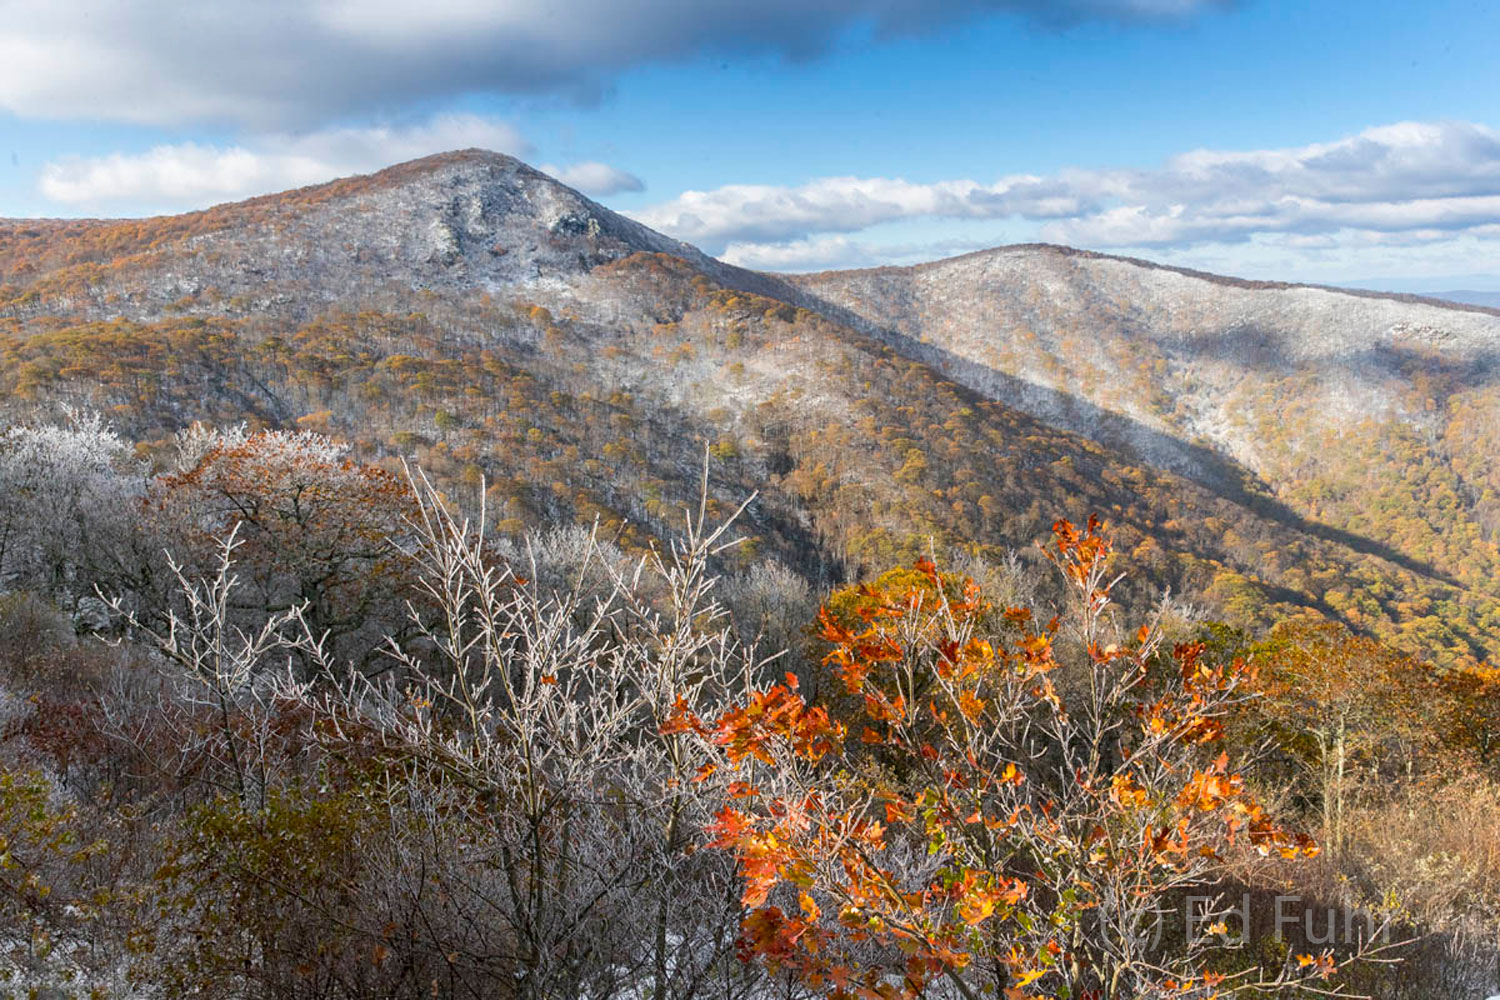 Shenandoah's Hawksbill Mountain rises above its snowy neighbors this autumn morning.  The best overlook view of Shenandoah's...